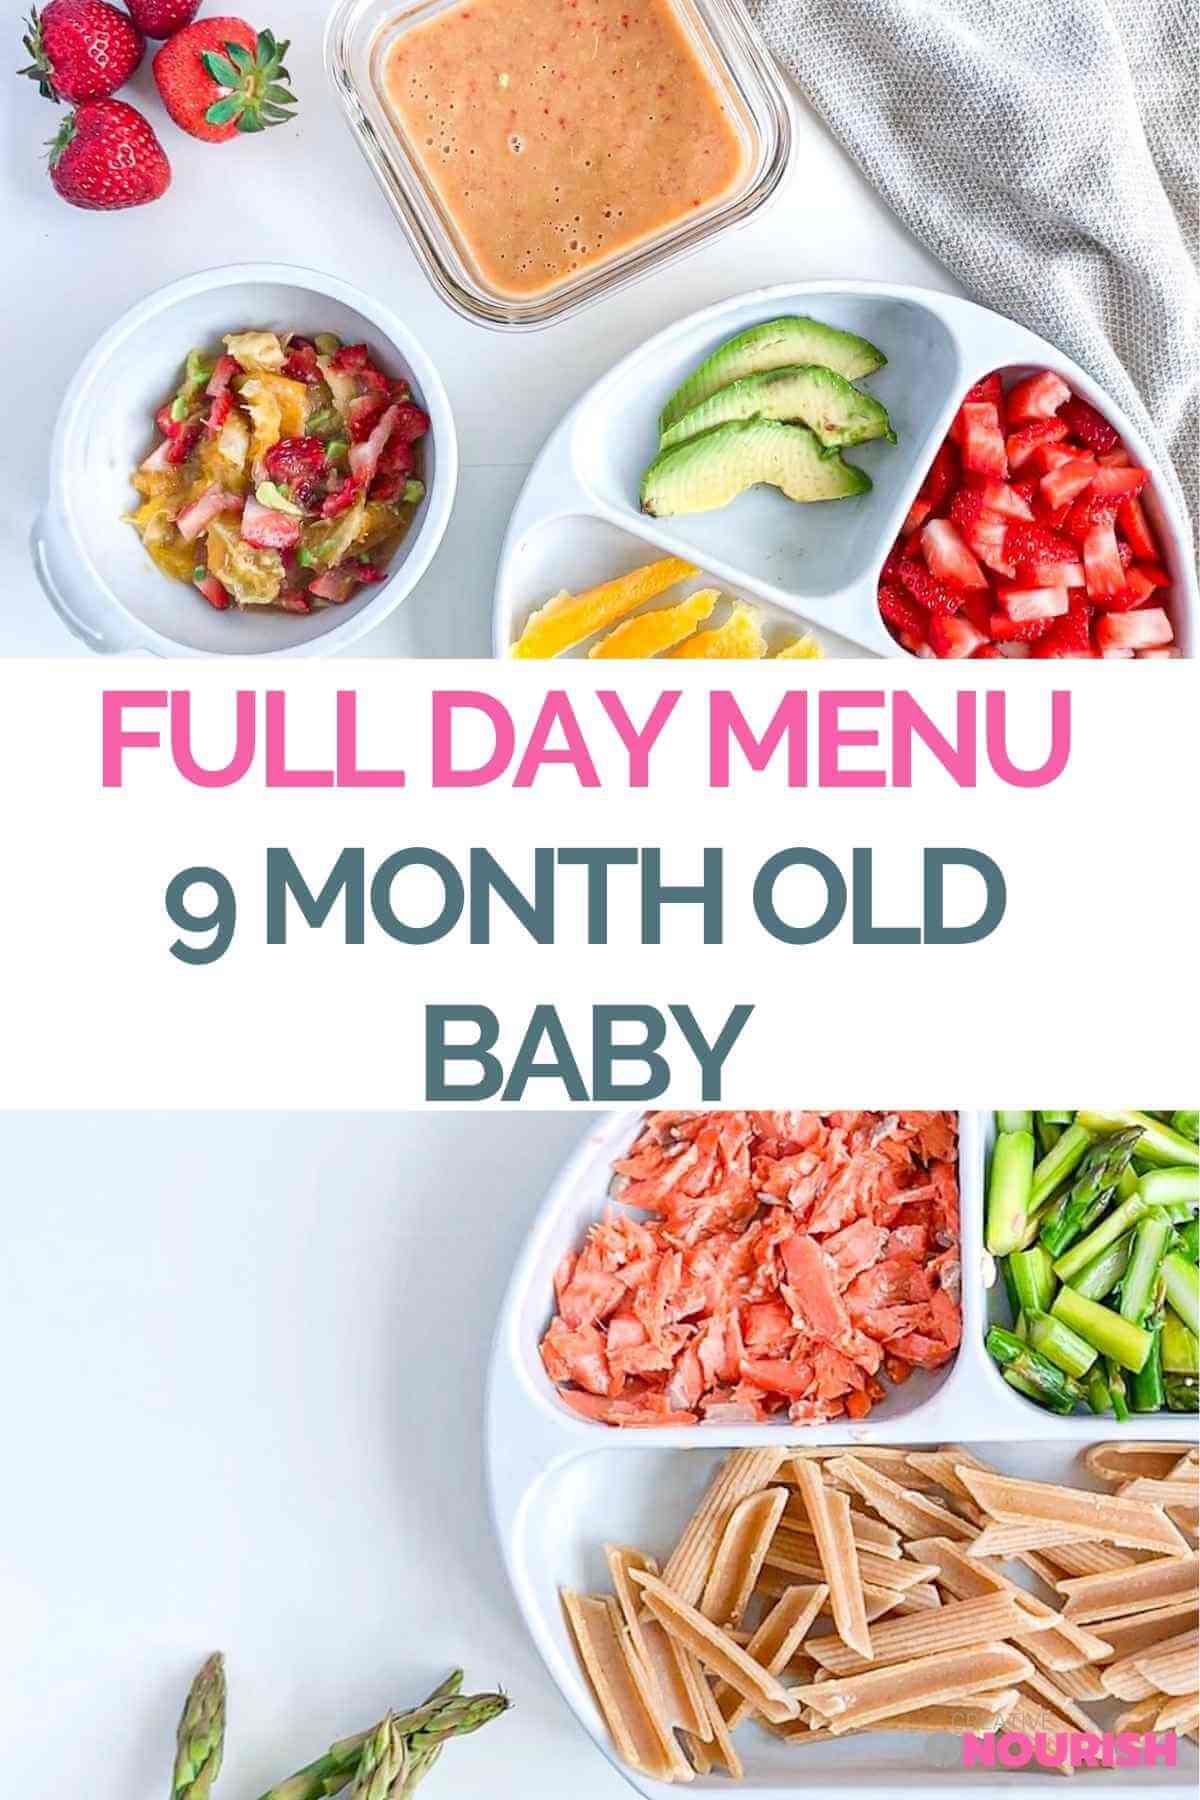 photos of the food included in the baby food menu for 9 month old 